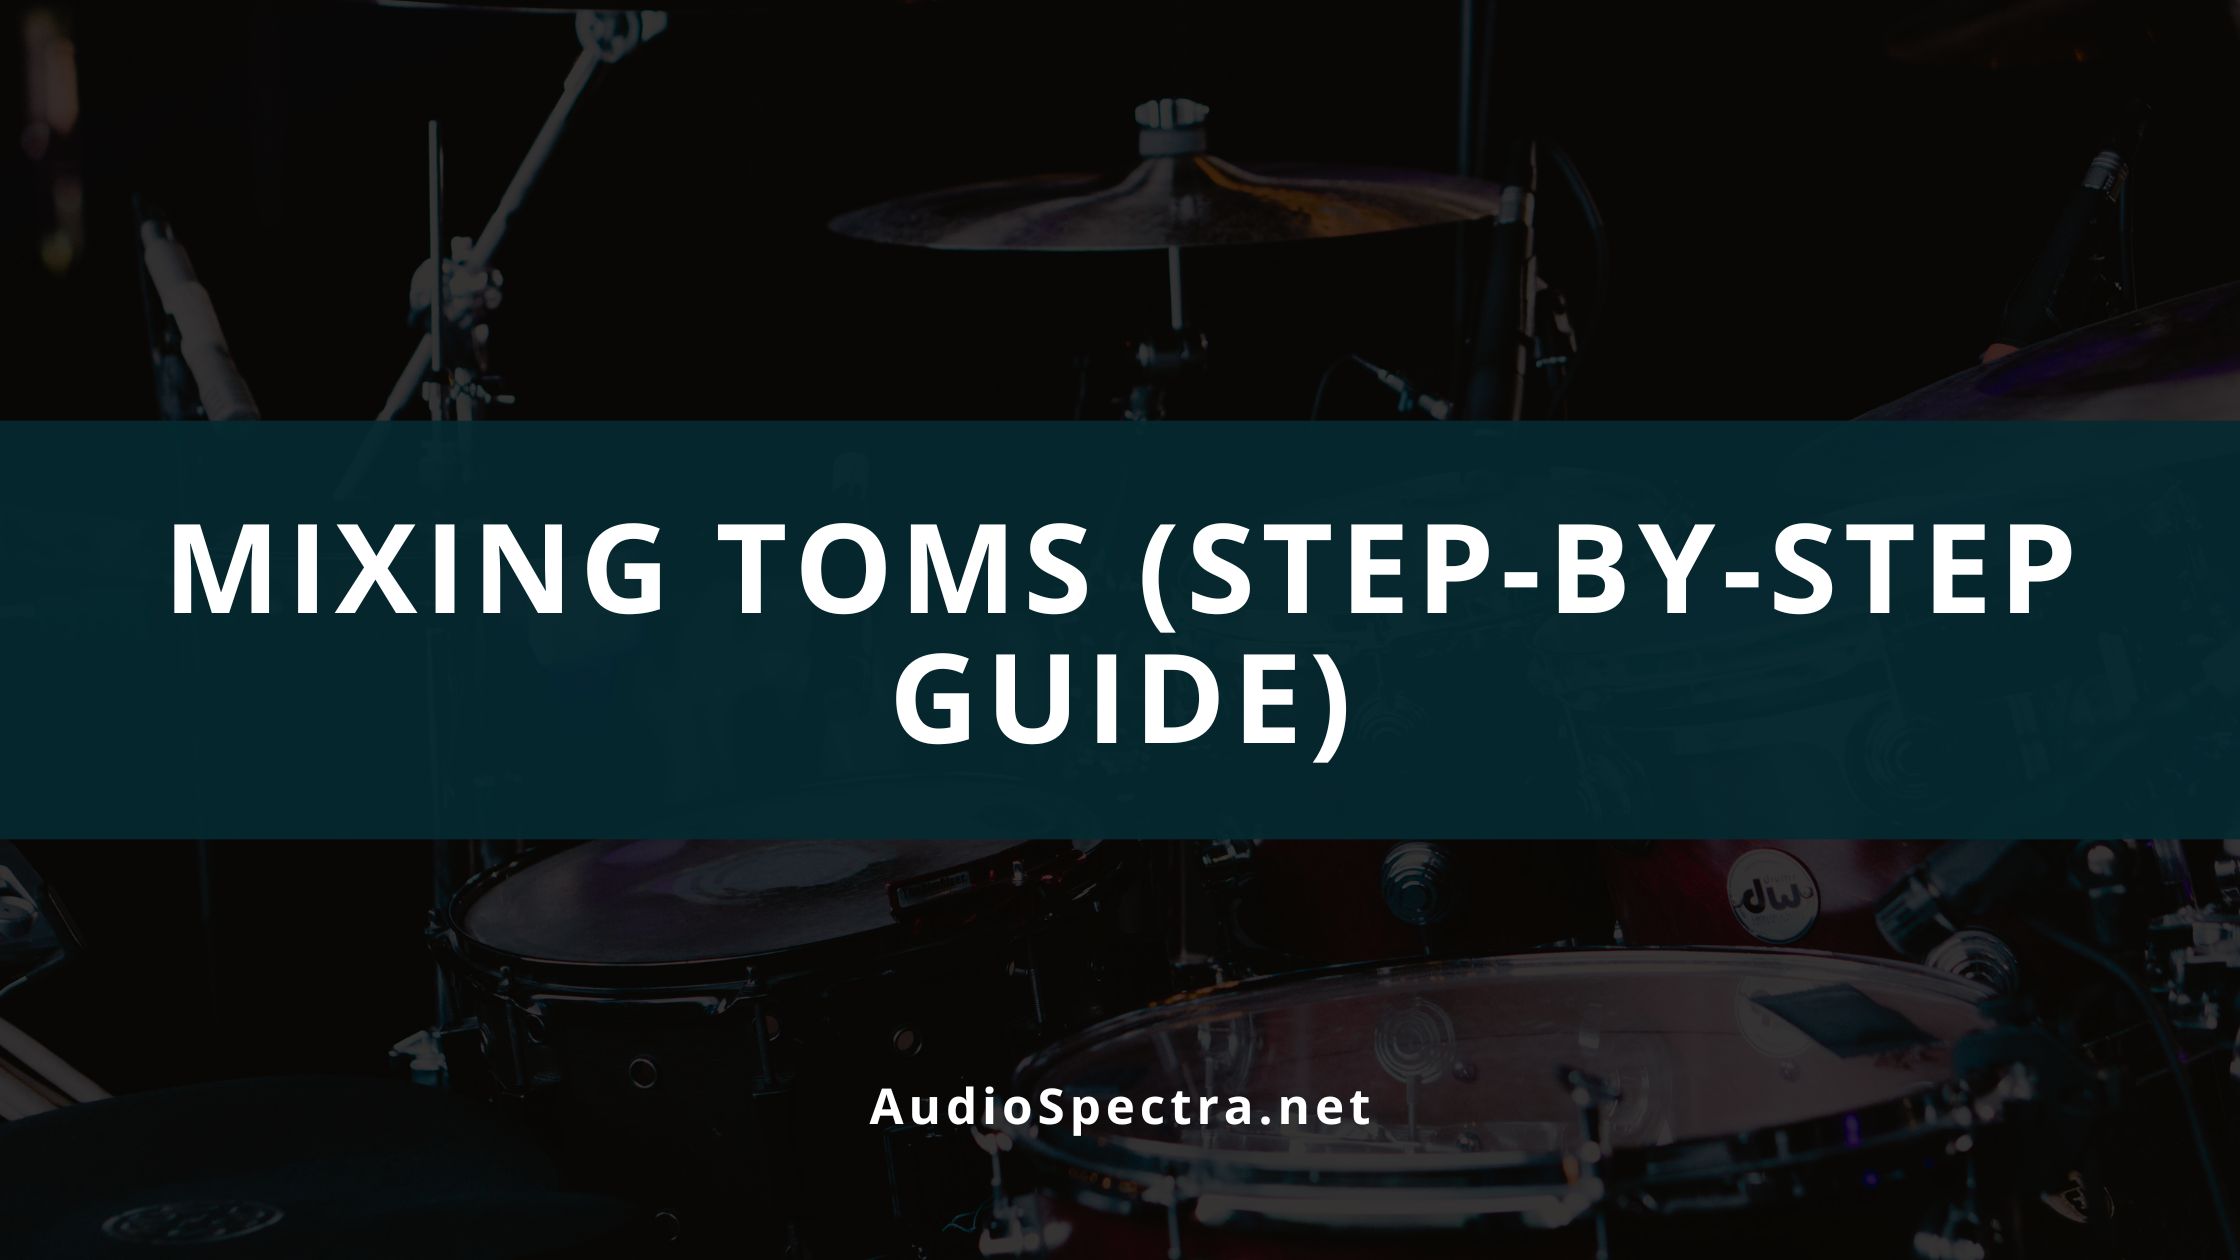 How To Mix Toms